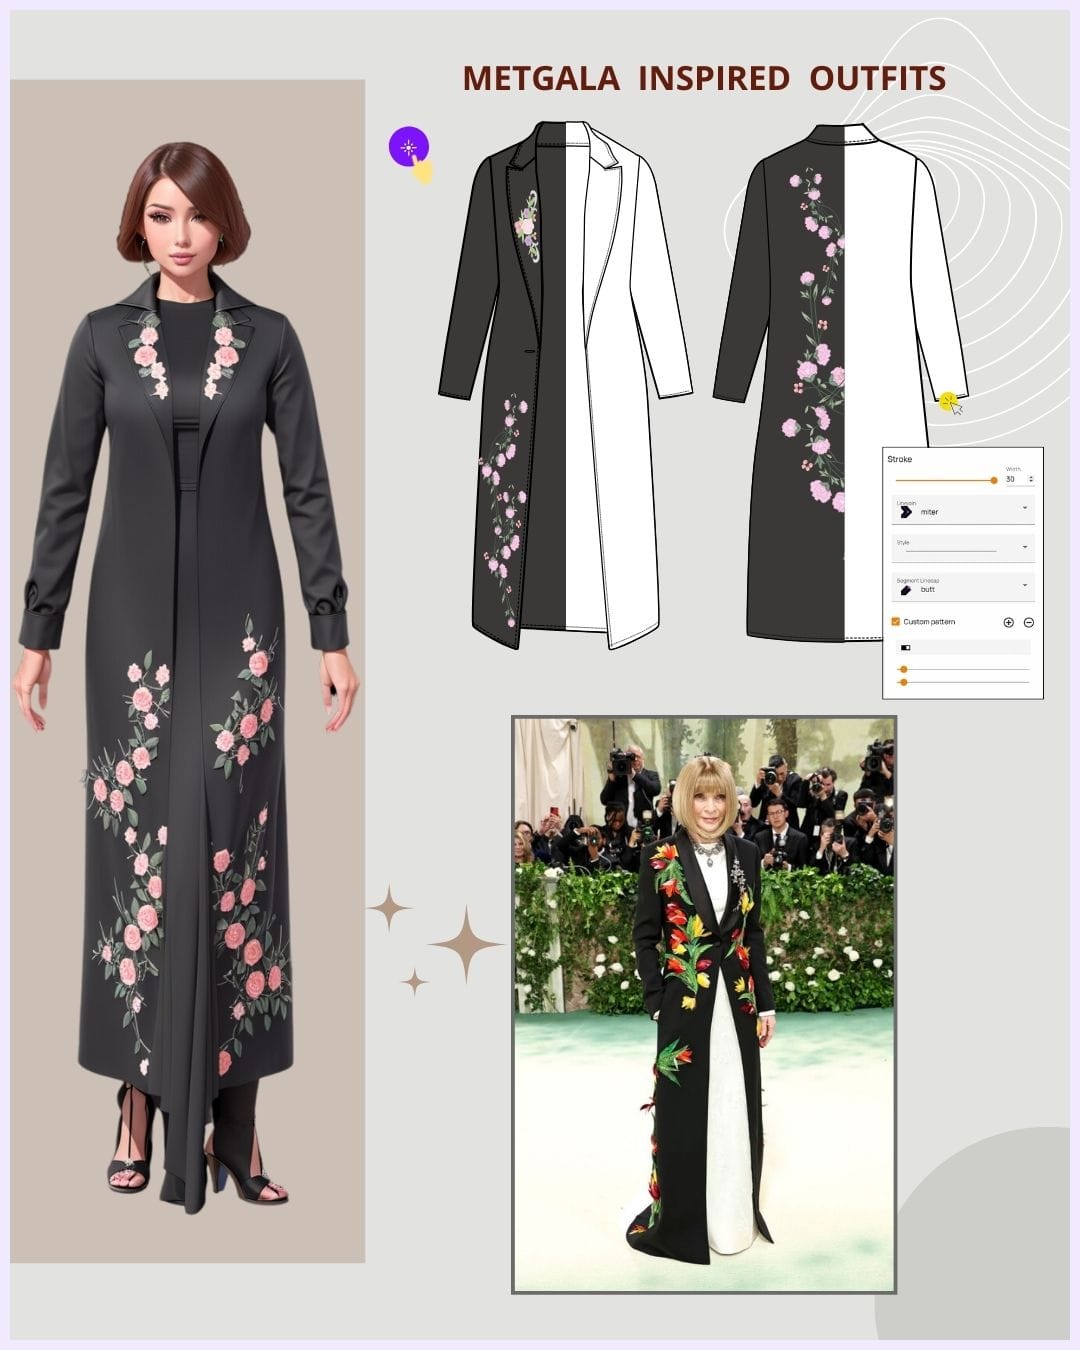 Met Gala Inspired Outfits Blog Graphic